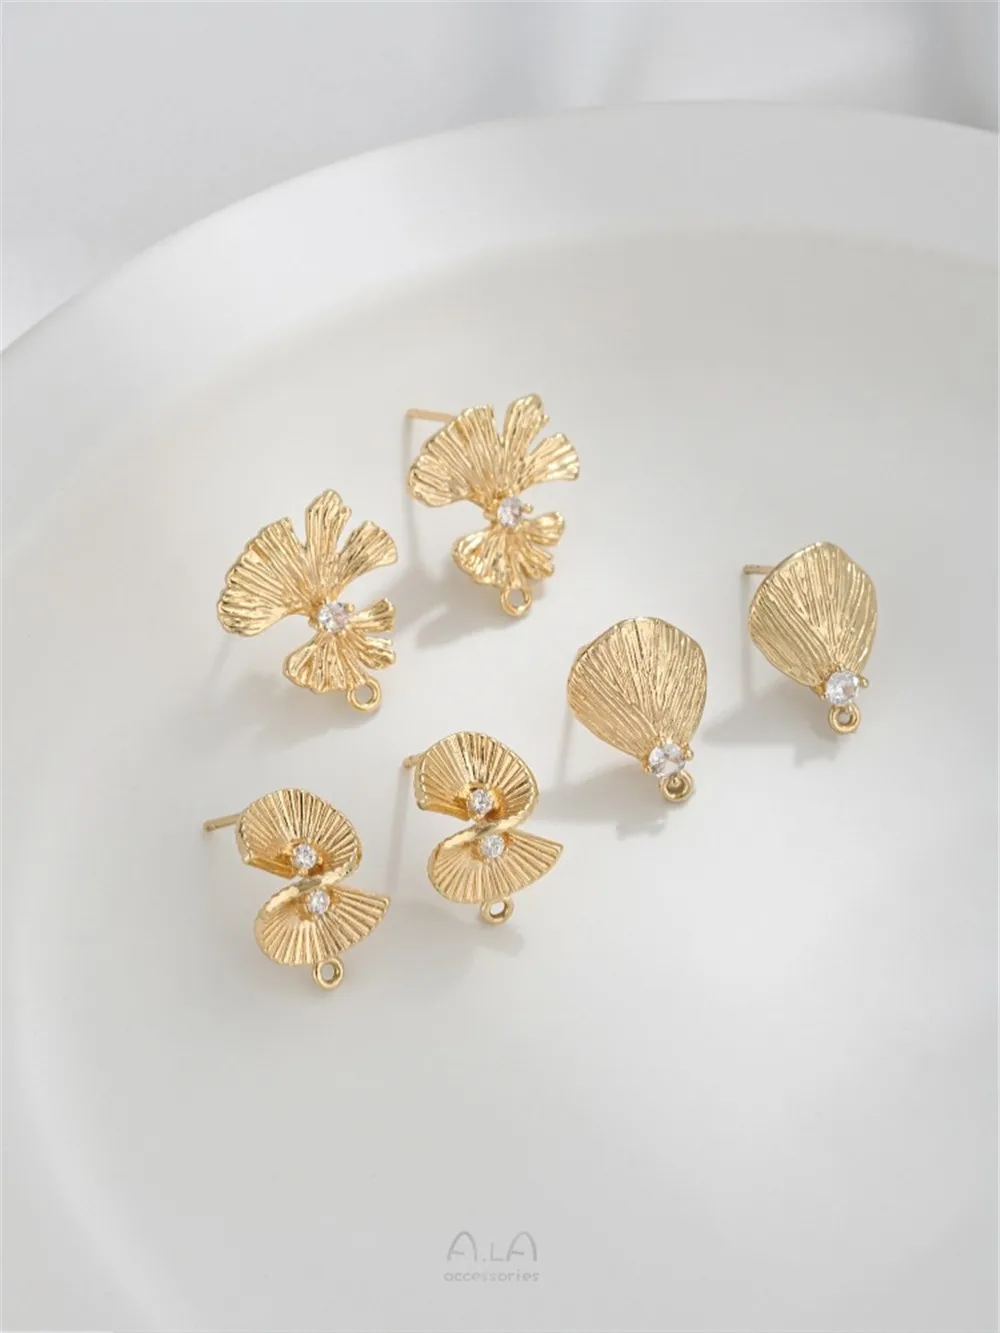 925 Silver Needle 14K Gold Ginkgo Garden Fan-shaped Earrings with Rings Diy Hand Earring Accessories E364 toys cars for toddlers 1 2 3 years hand grasp rattles ball soft rubber car mobile bell rings sensory baby toys car infant gifts